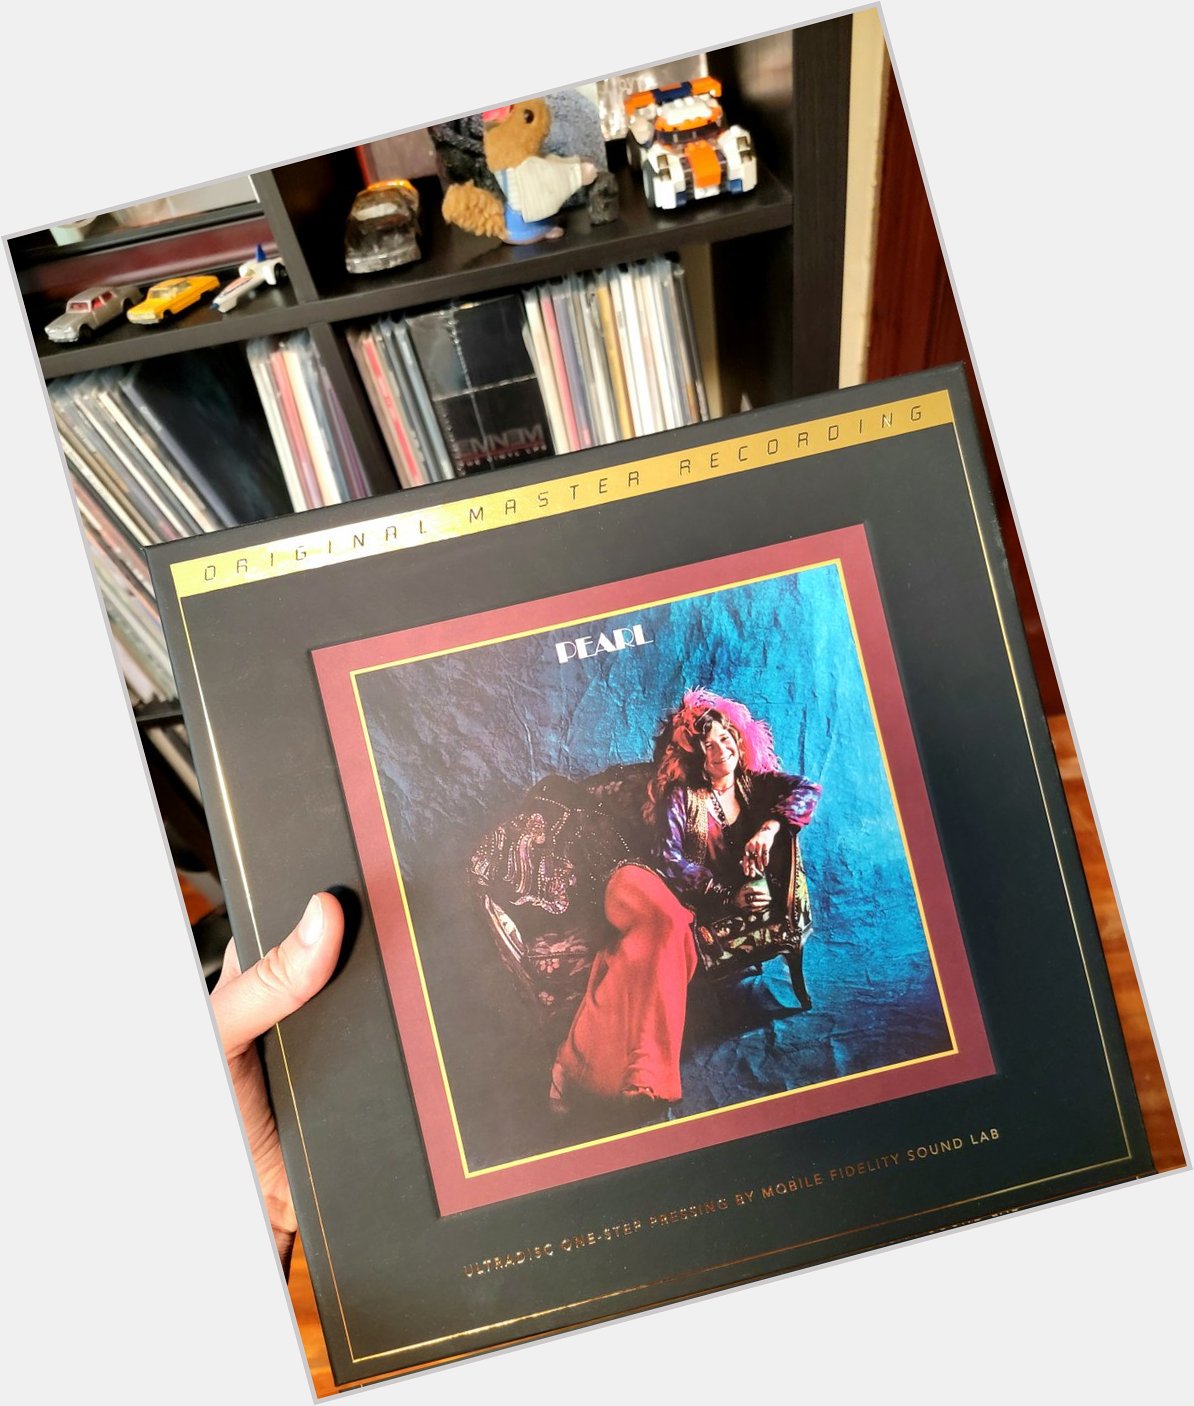 Happy Birthday to Janis Joplin from my wife! vinyl so pure you can see right through    